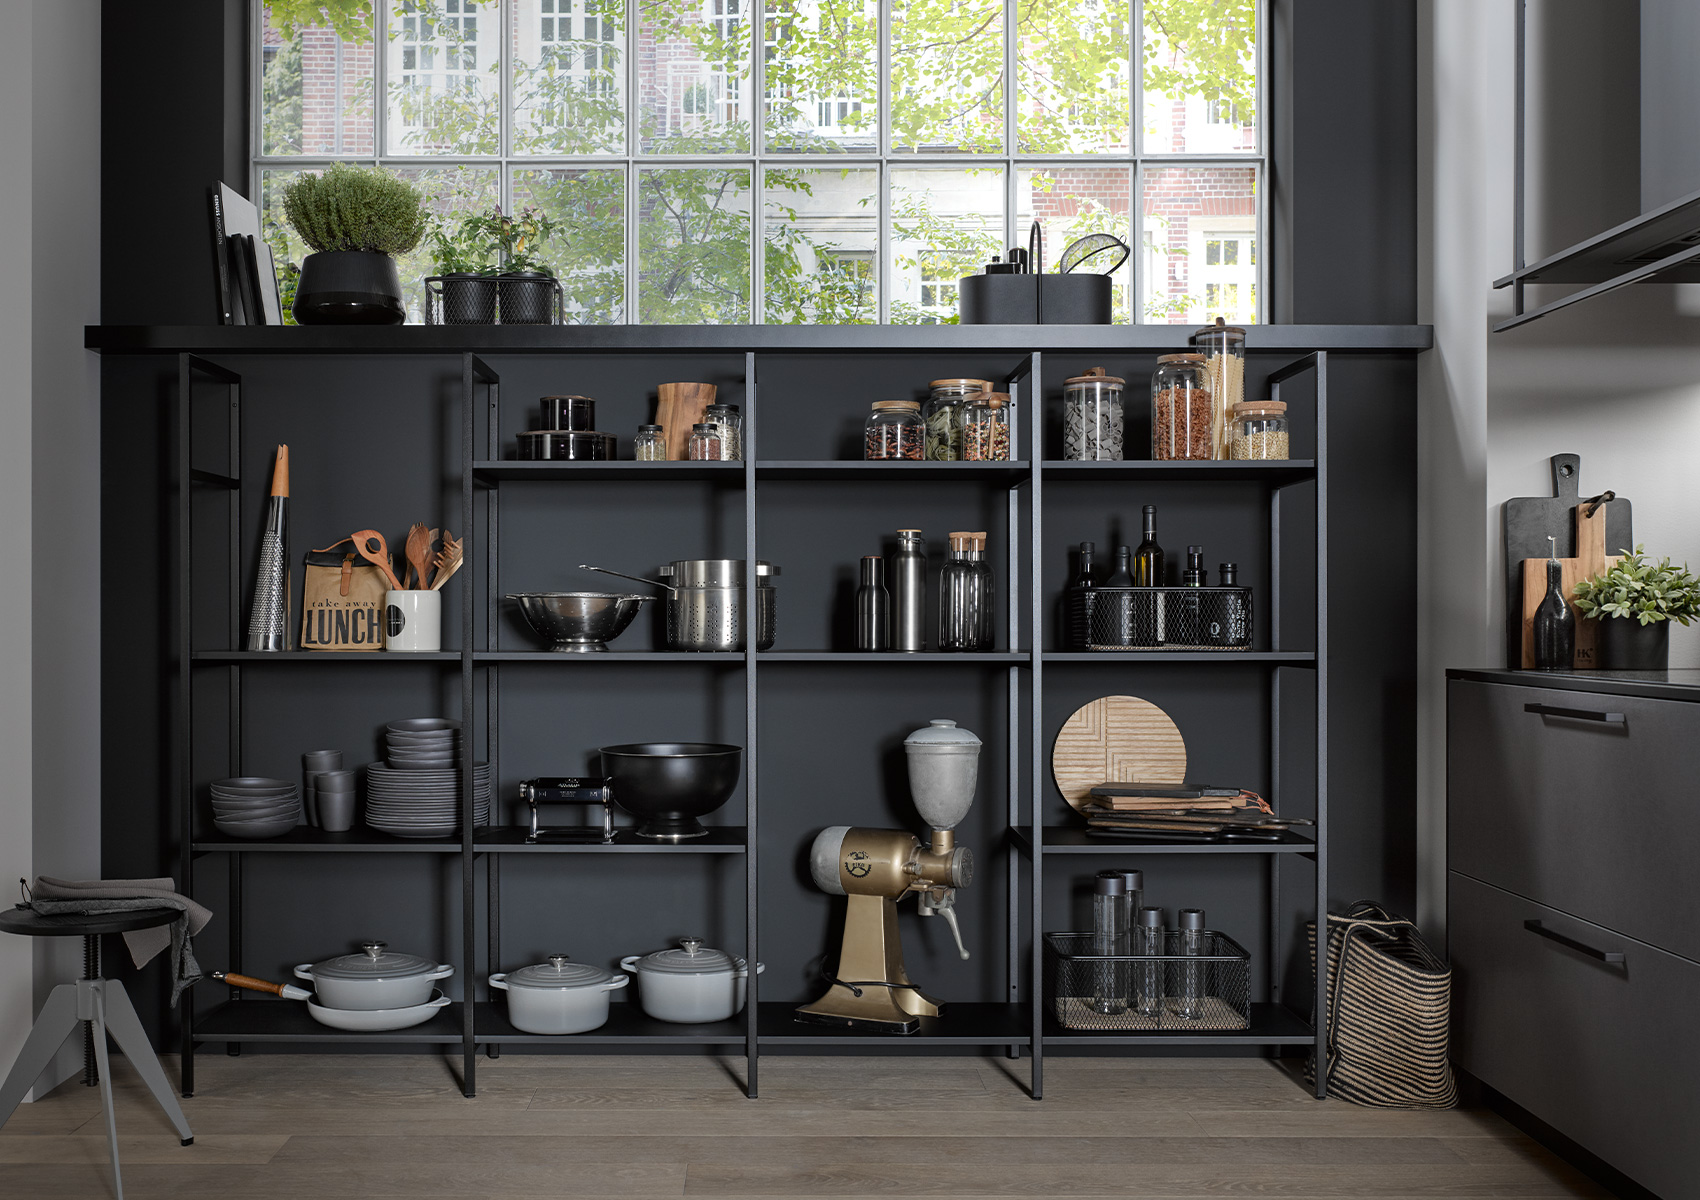 Shelving system in industrial style